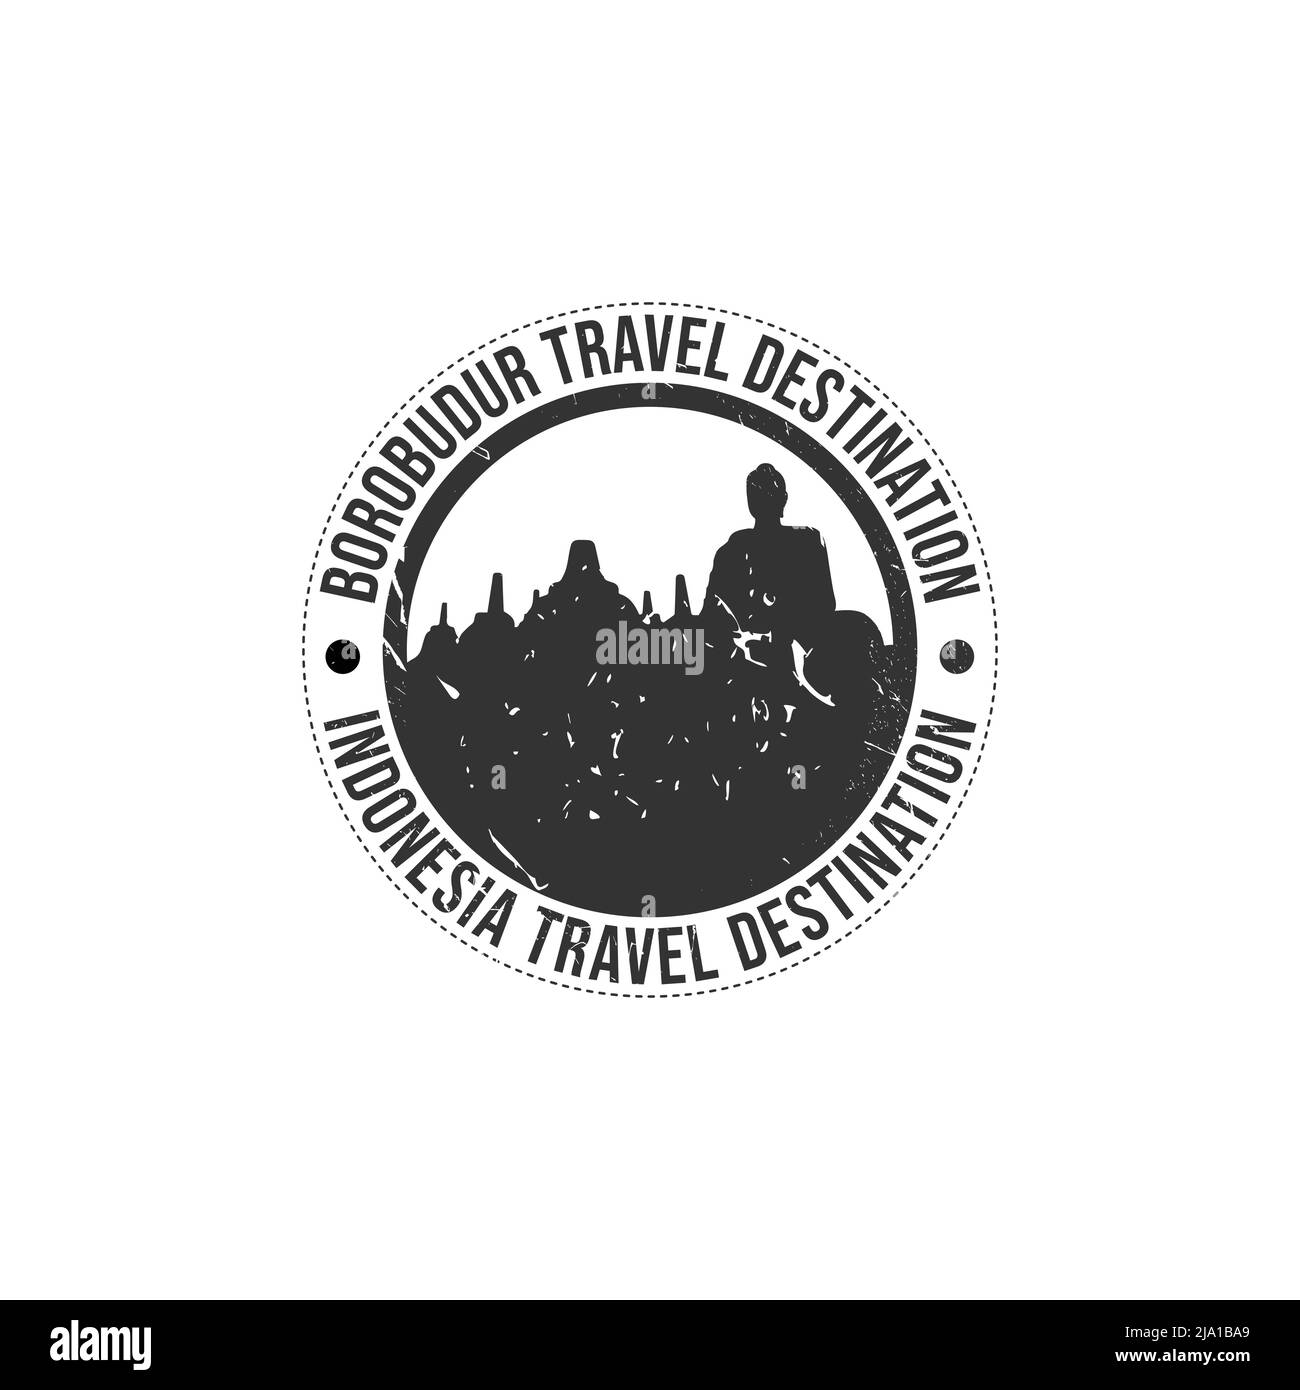 Grunge rubber stamp with the text Borobudur travel destination written inside the stamp. Time to travel. Silhouette borobudur temple indonesia histori Stock Vector